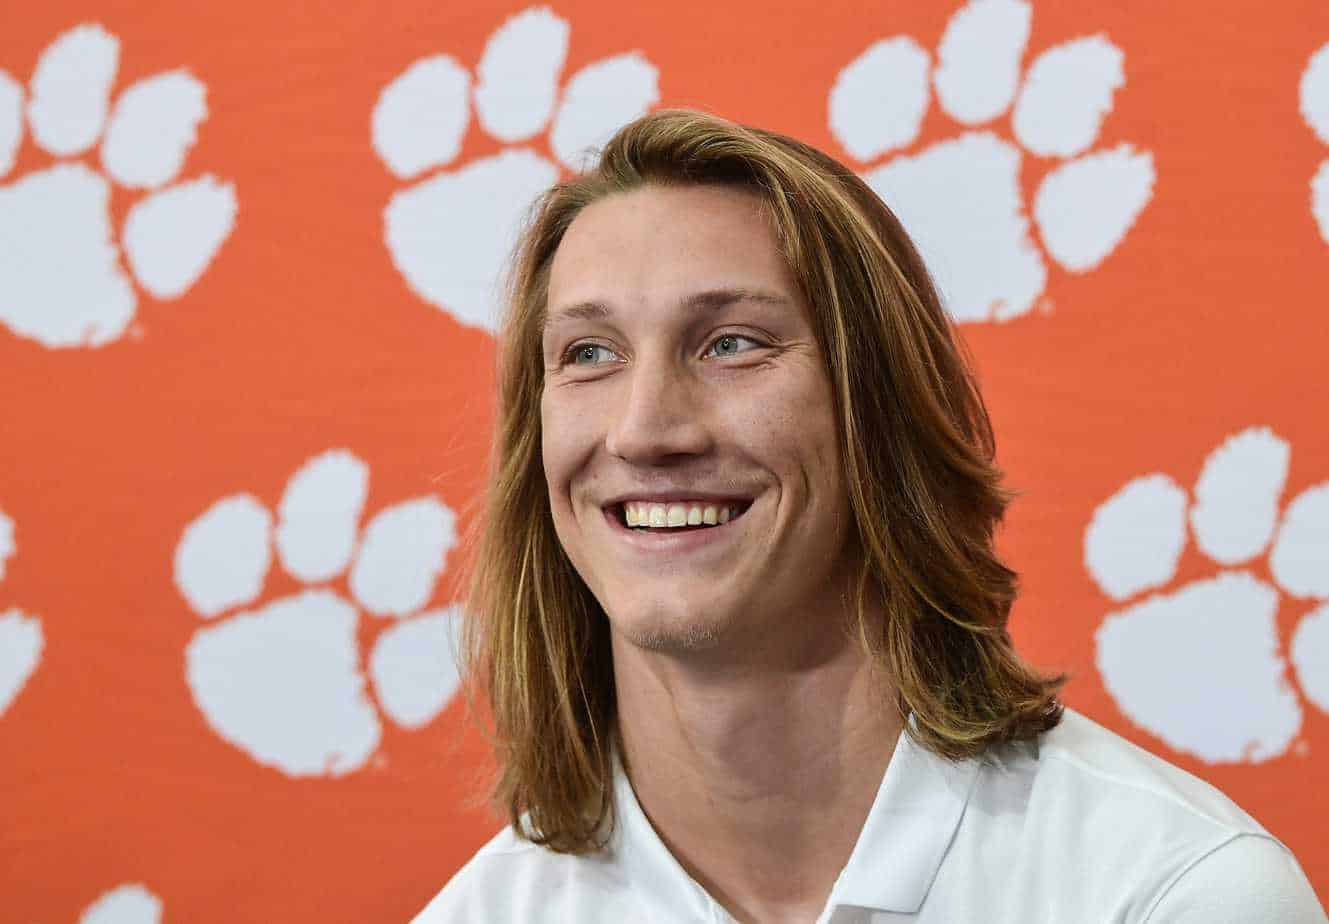 Trevor Lawrence future NFL first overall pick by New York Jets